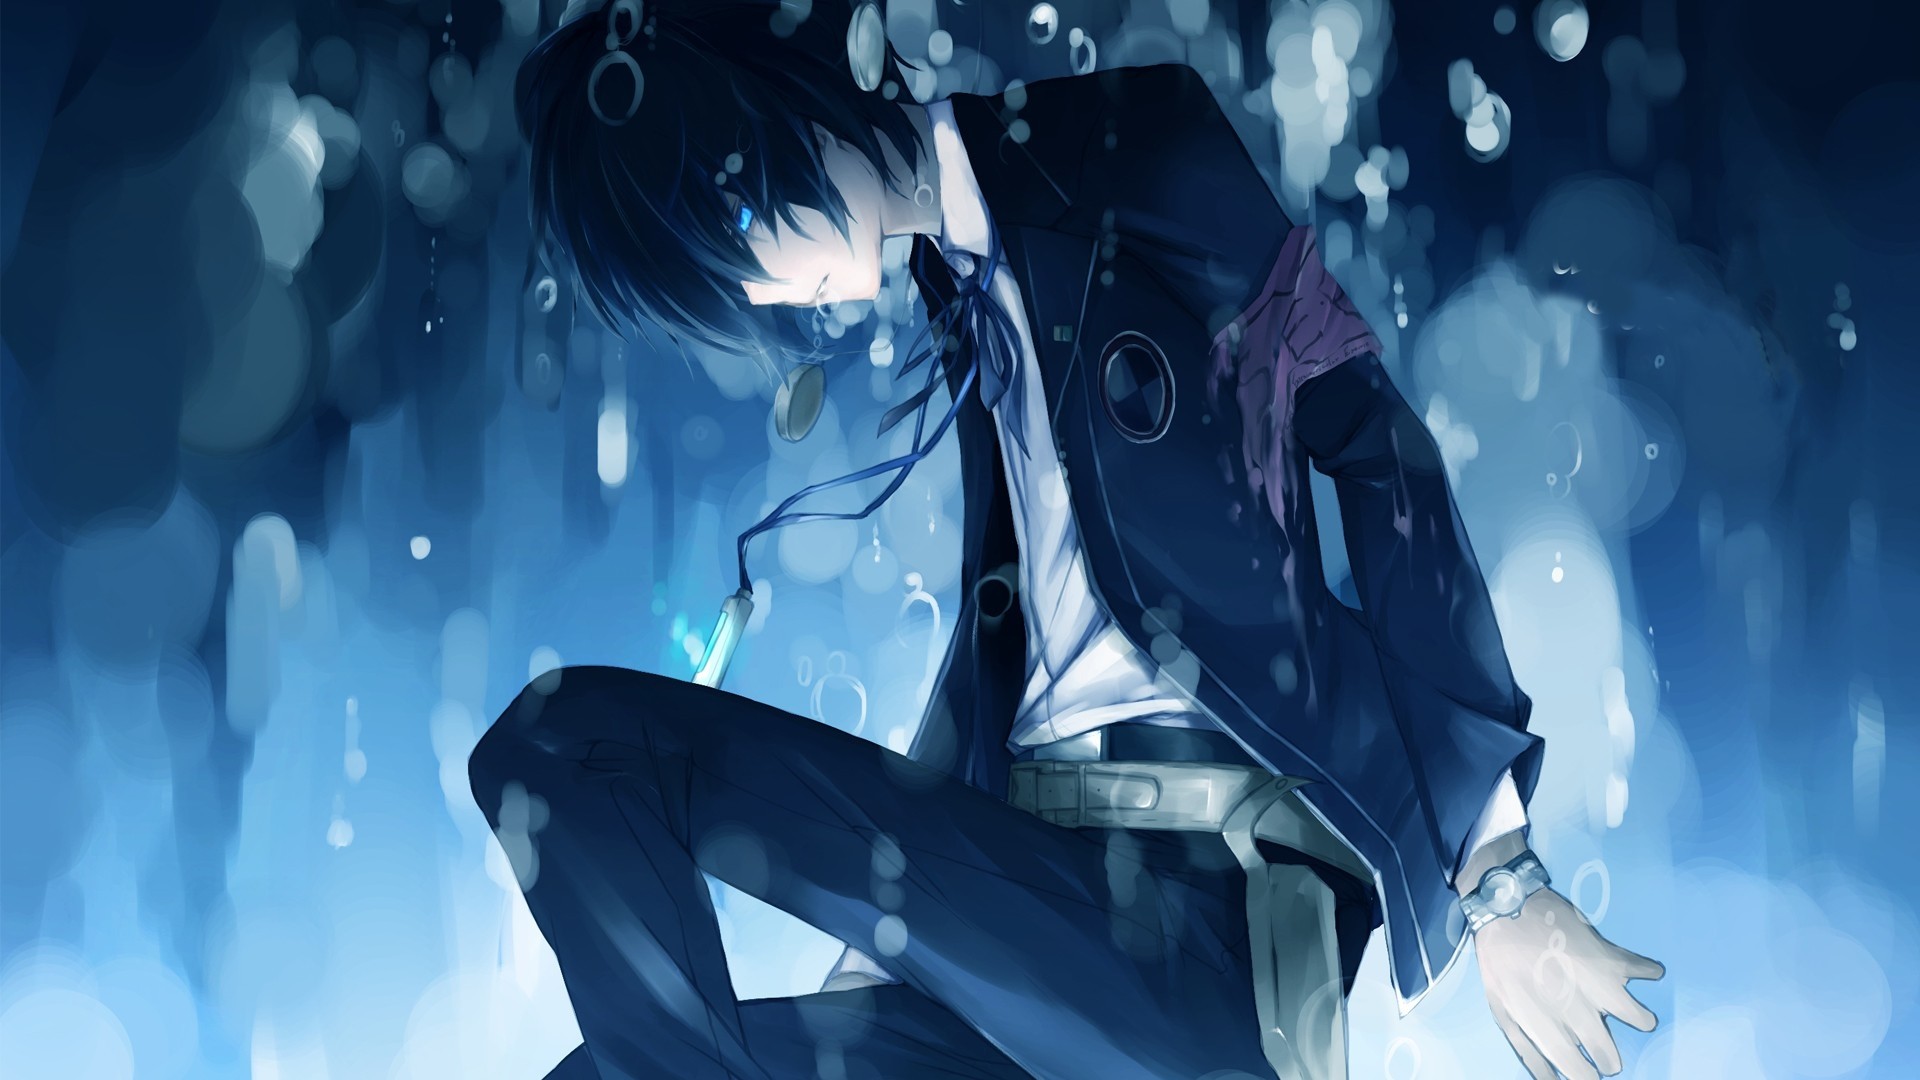 1920x1080 Emo wallpaper.I love this one <3 Drowning,anime boys.